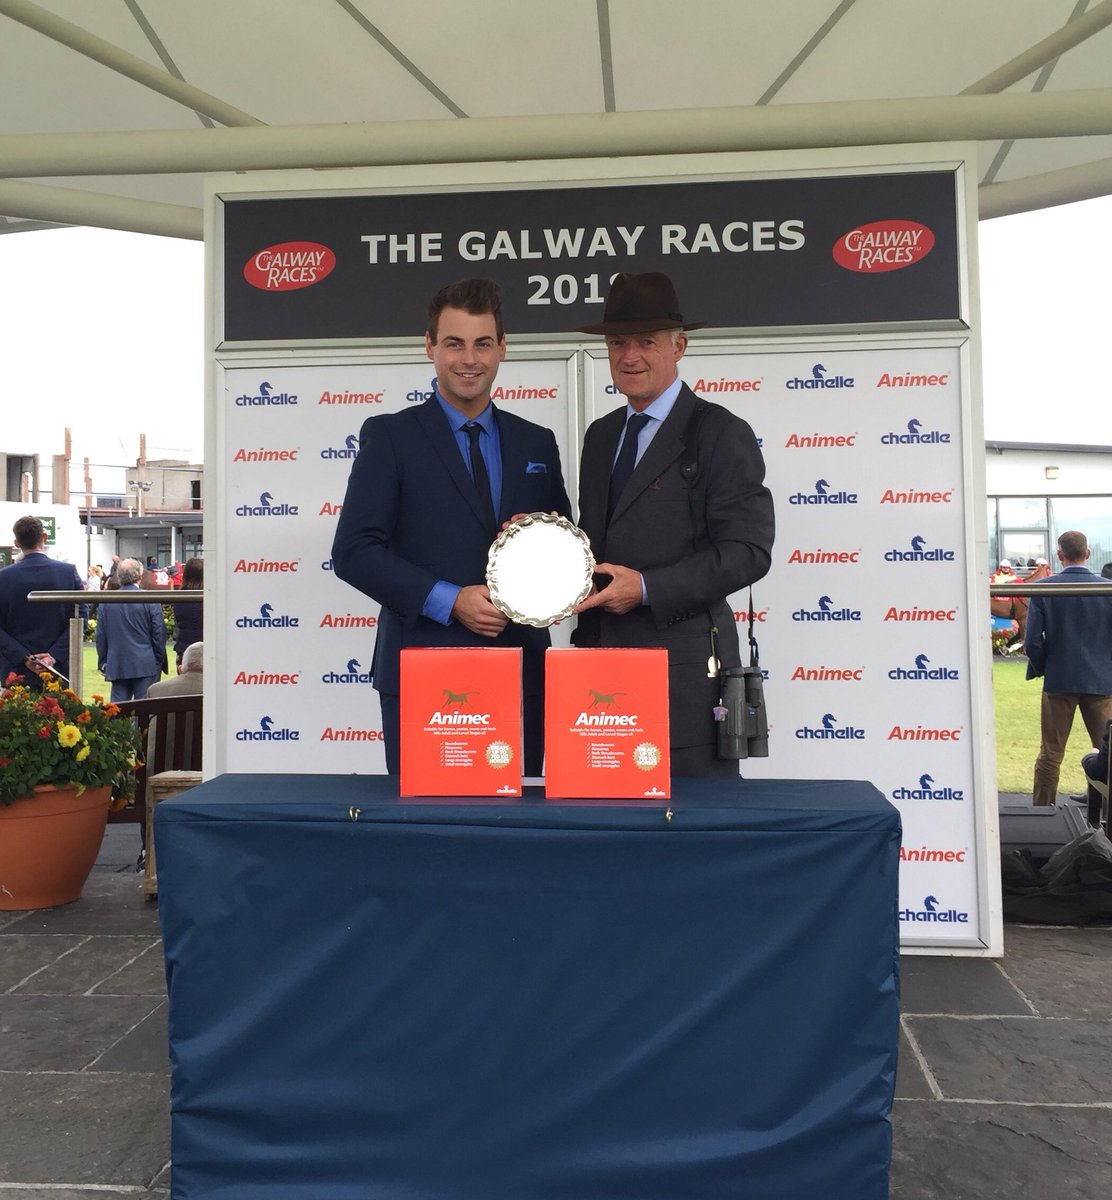 Well done @WillieMullinsNH on winning the Leading Trainer at @Galway_Races for the third year in a row! #GalwayRaces #LeadingTrainer #WillieMullins